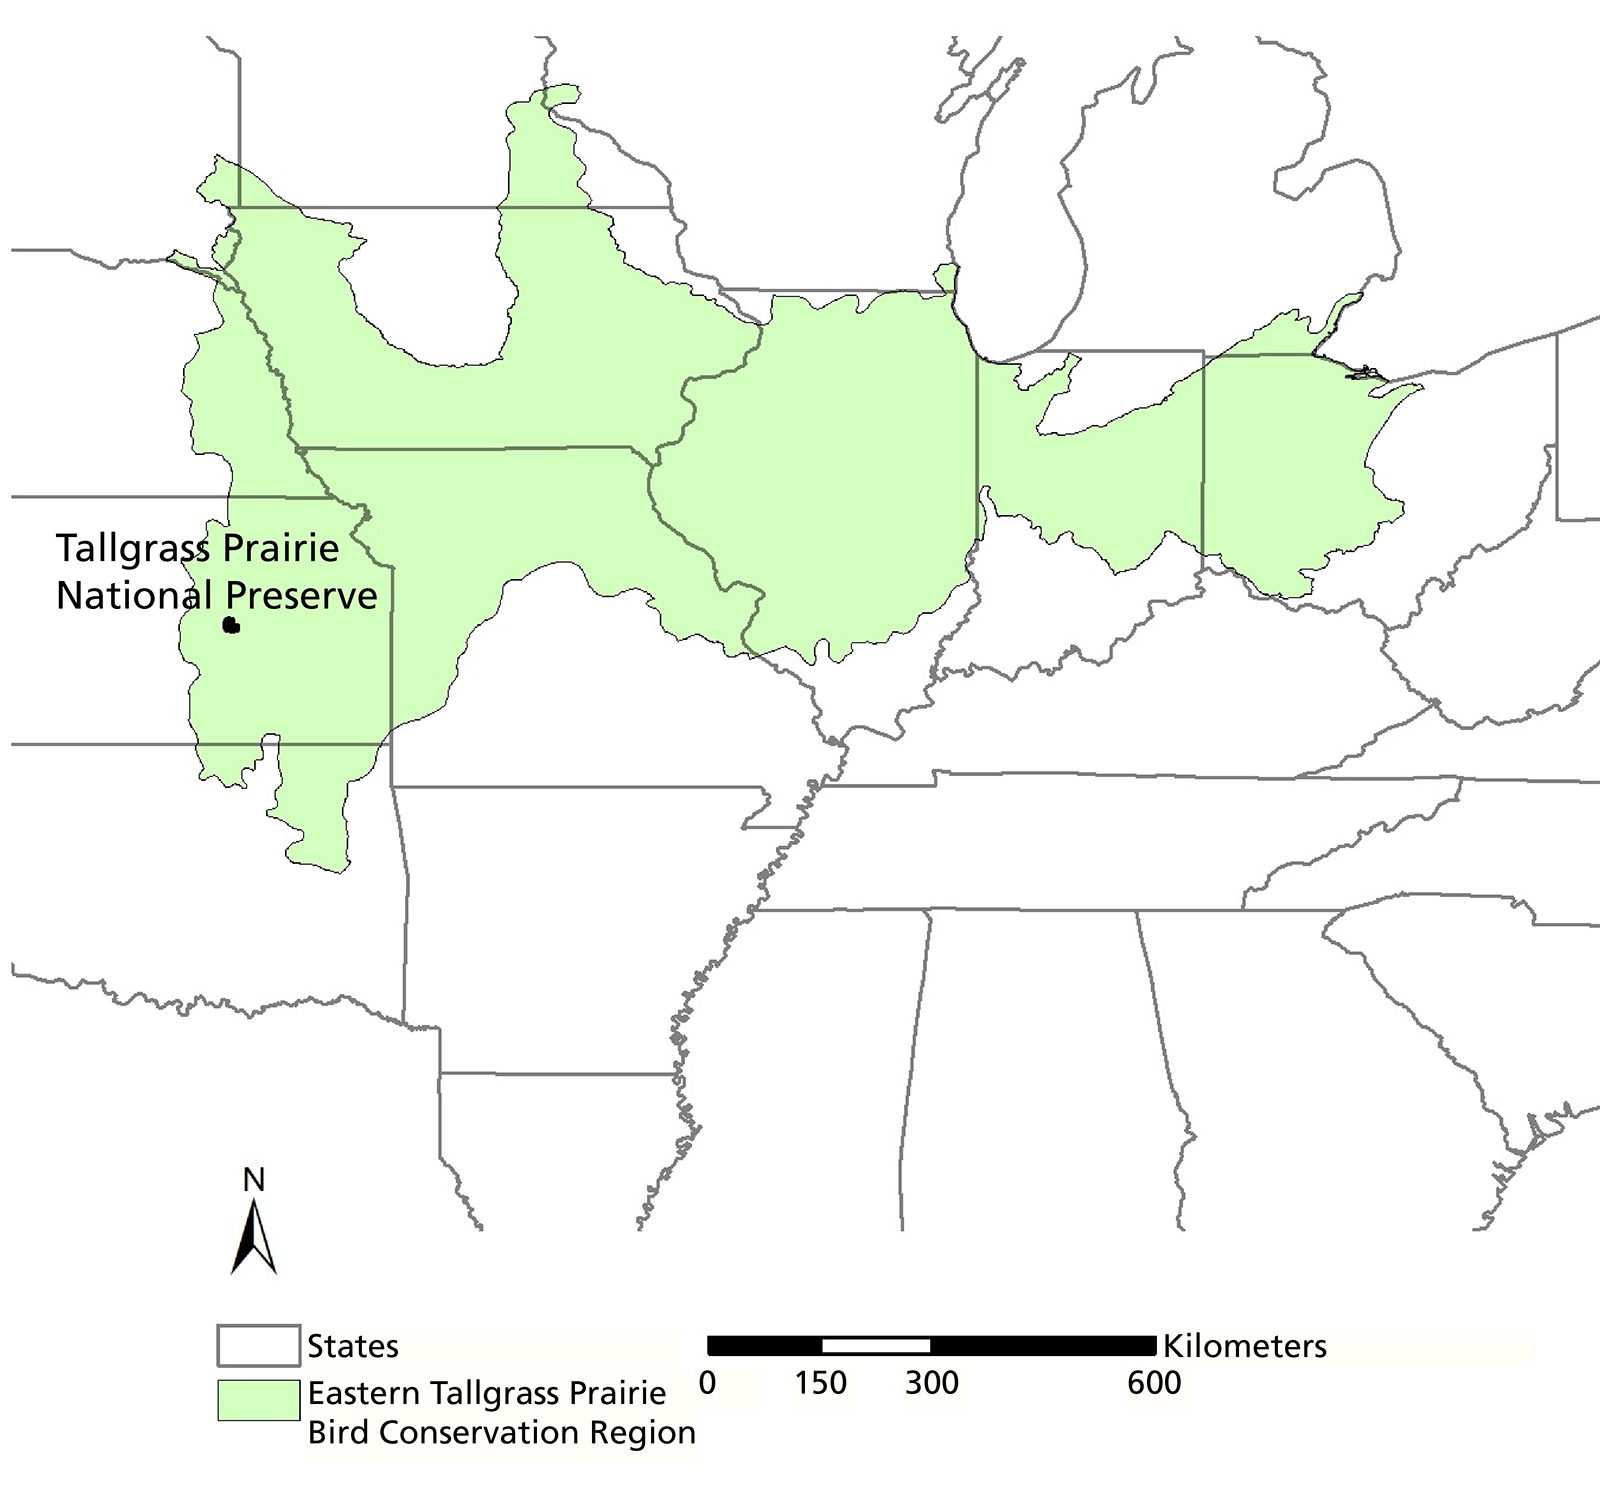 A map of tallgrass prairie in the US stretching from central Kansas to central Ohio and the location of Tallgrass Prairie National Preserve is marked in central eastern Kansas